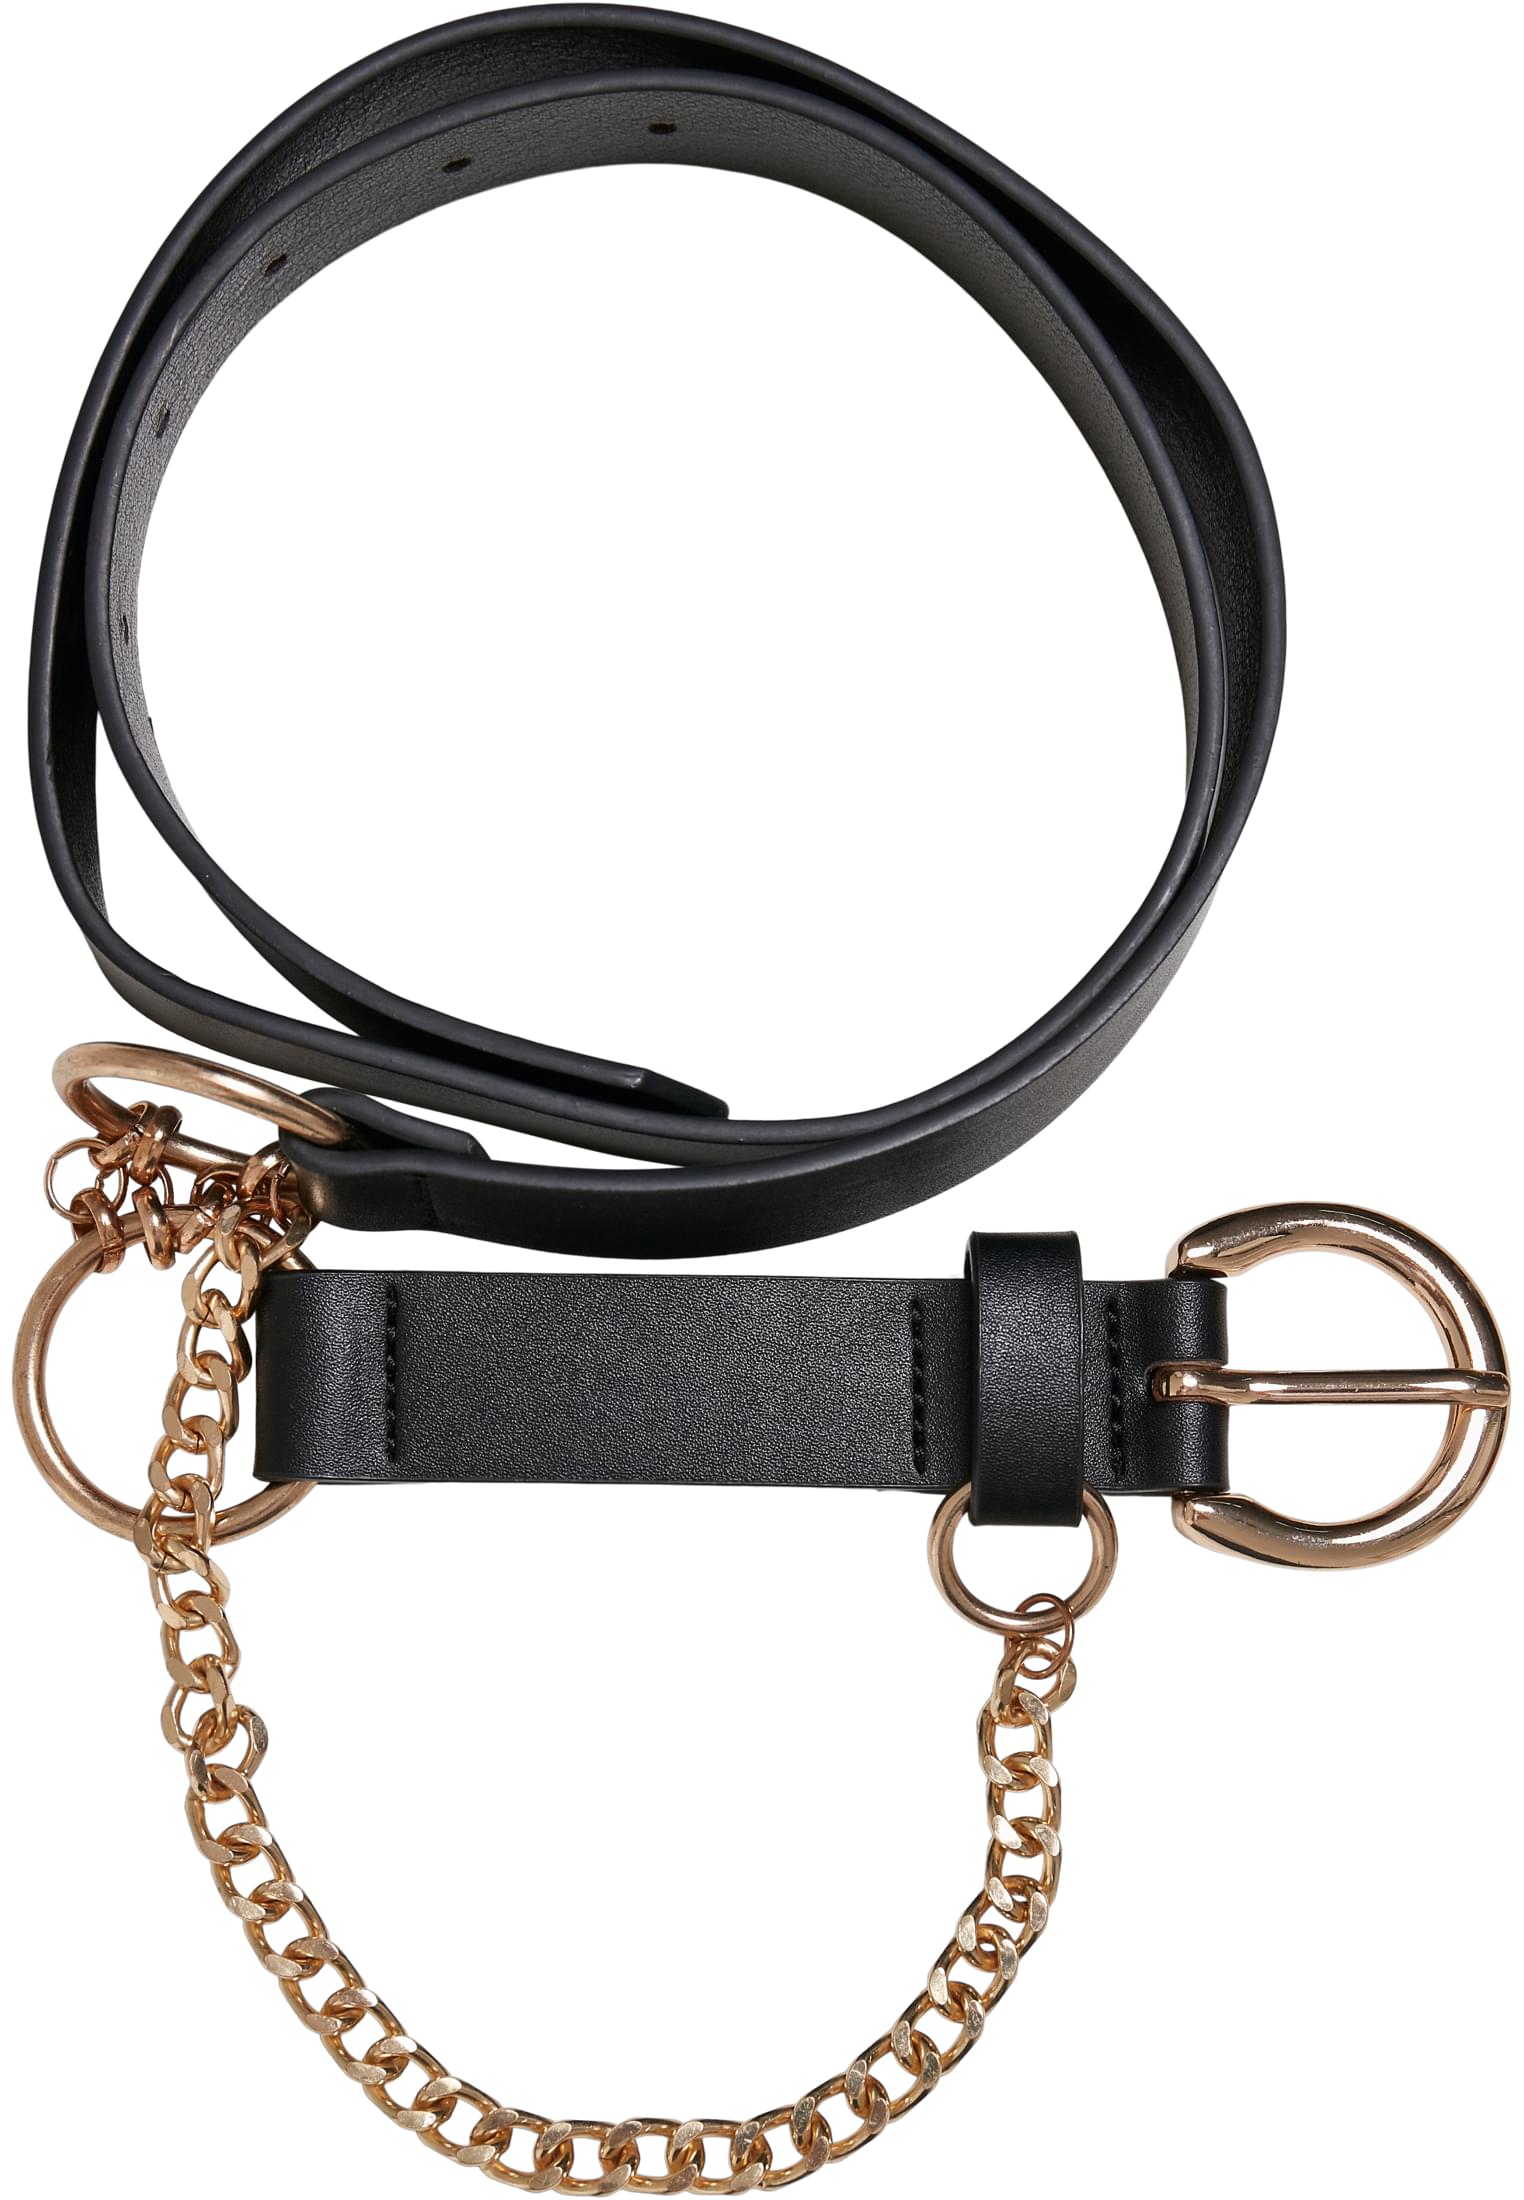 Synthetic leather strap with chain